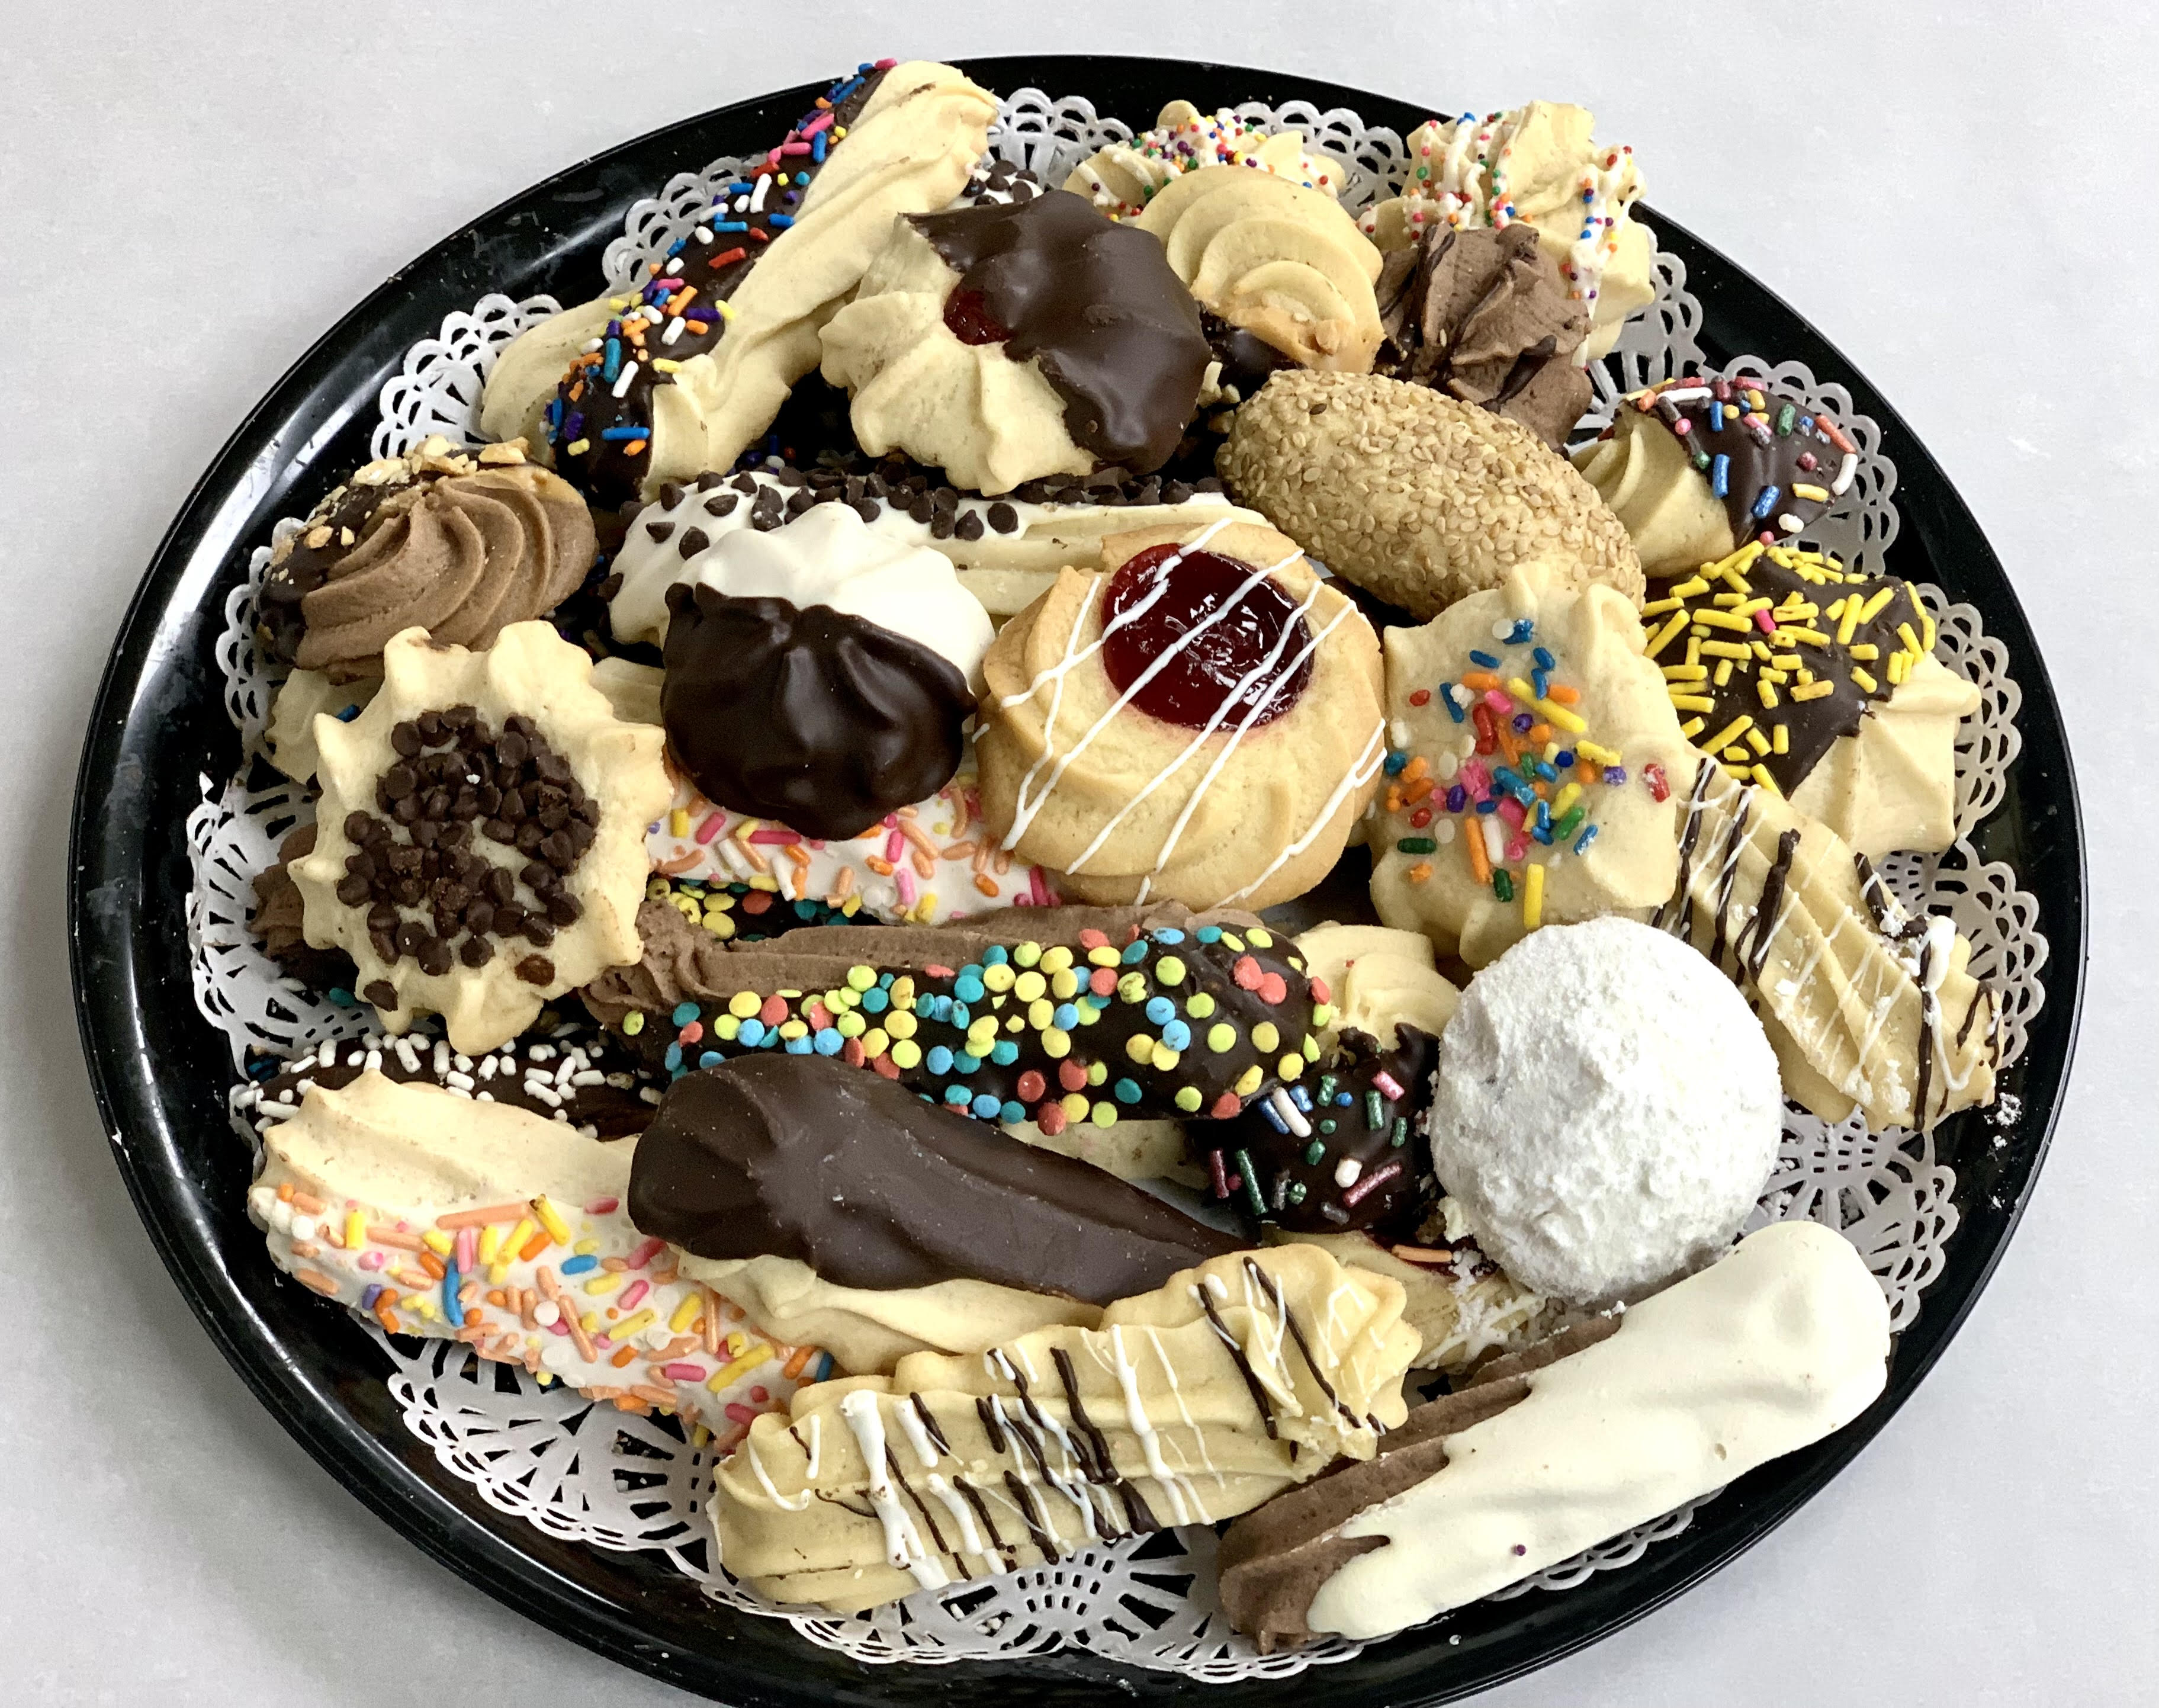 Corropolese Cookies & Assortment Cookie Trays